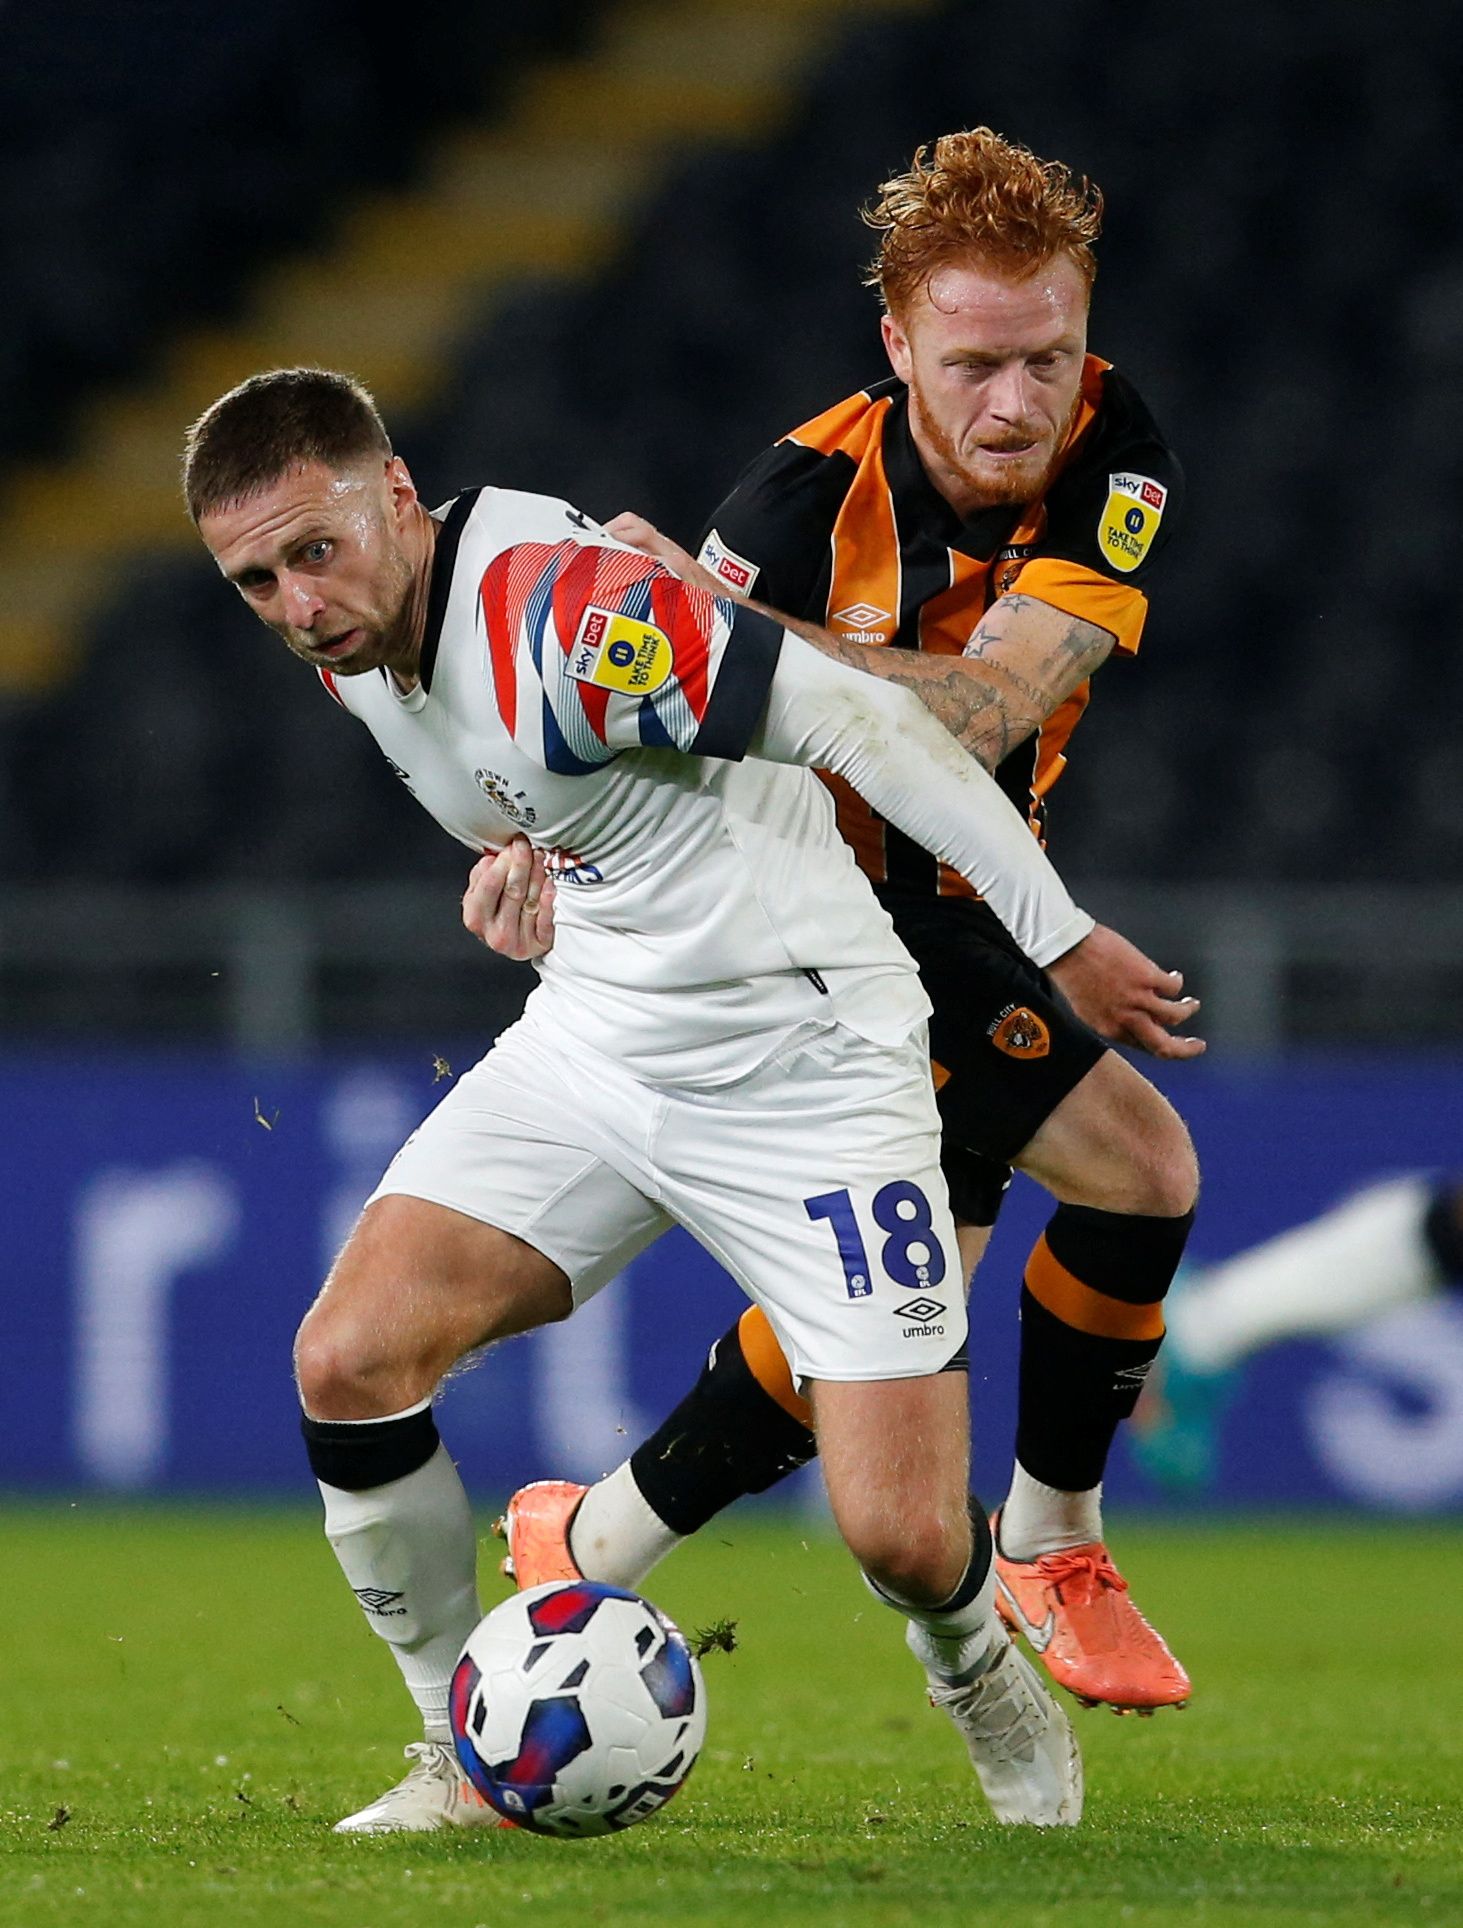 Soccer Football - Championship - Hull City v Luton Town - MKM Stadium, Hull, Britain - September 30, 2022 Luton Town's Jordan Clark in action with Hull City's Ryan Woods  Action Images/Ed Sykes  EDITORIAL USE ONLY. No use with unauthorized audio, video, data, fixture lists, club/league logos or 